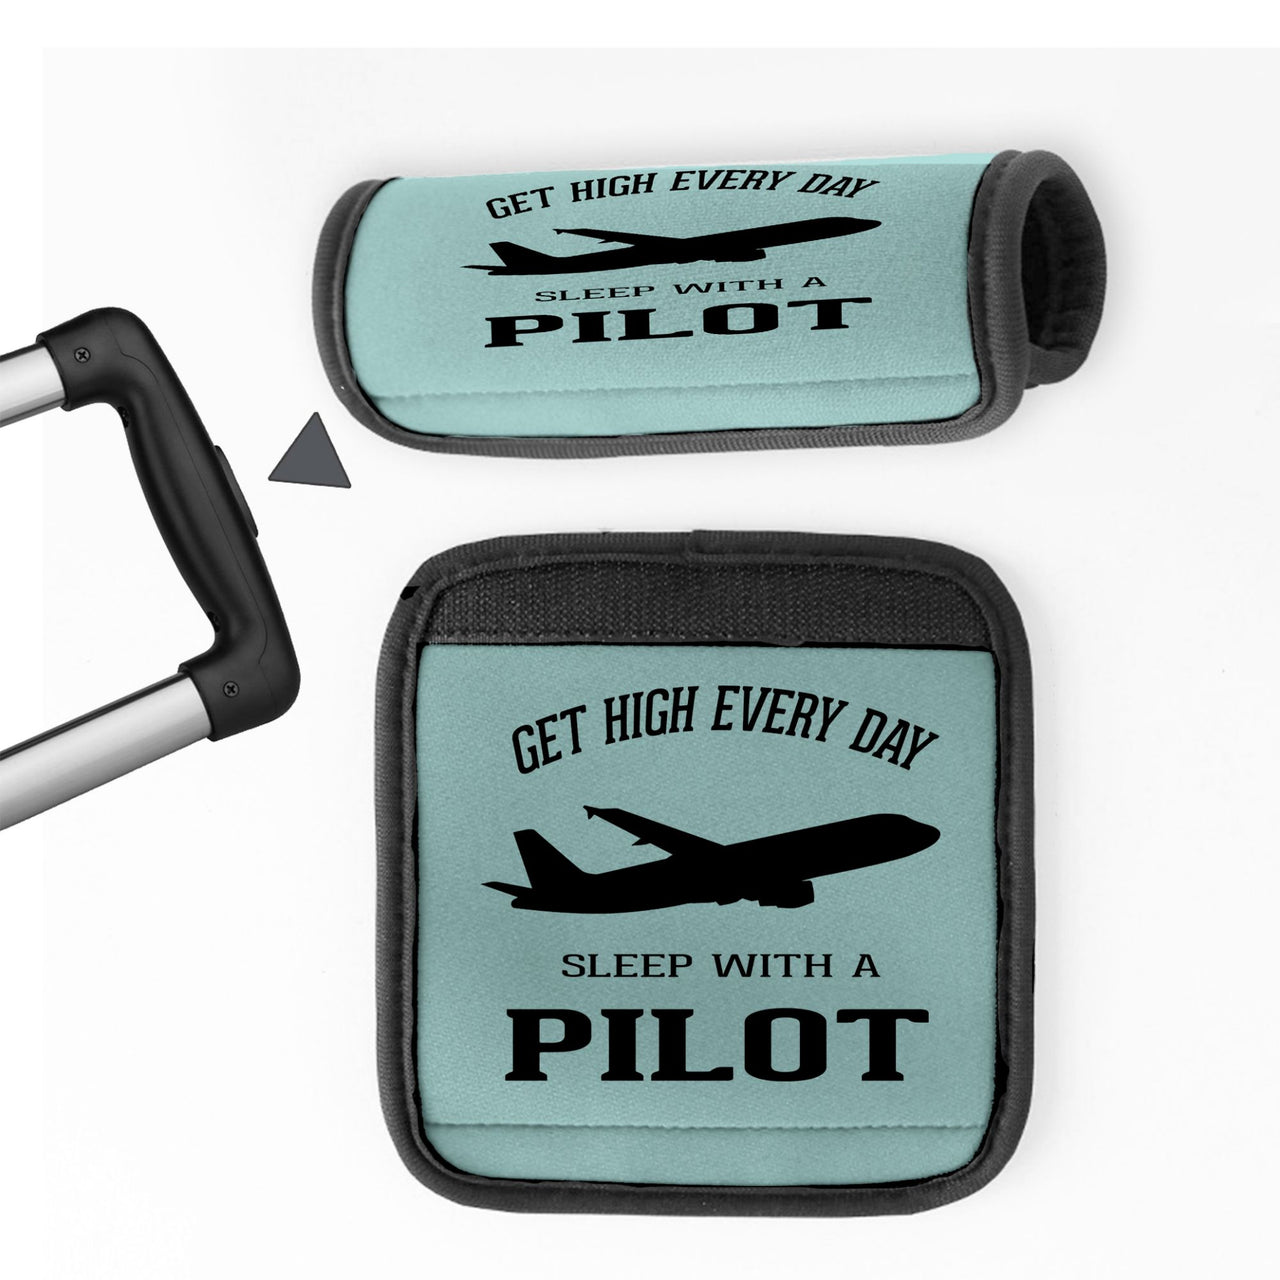 Get High Every Day Sleep With A Pilot Designed Neoprene Luggage Handle Covers